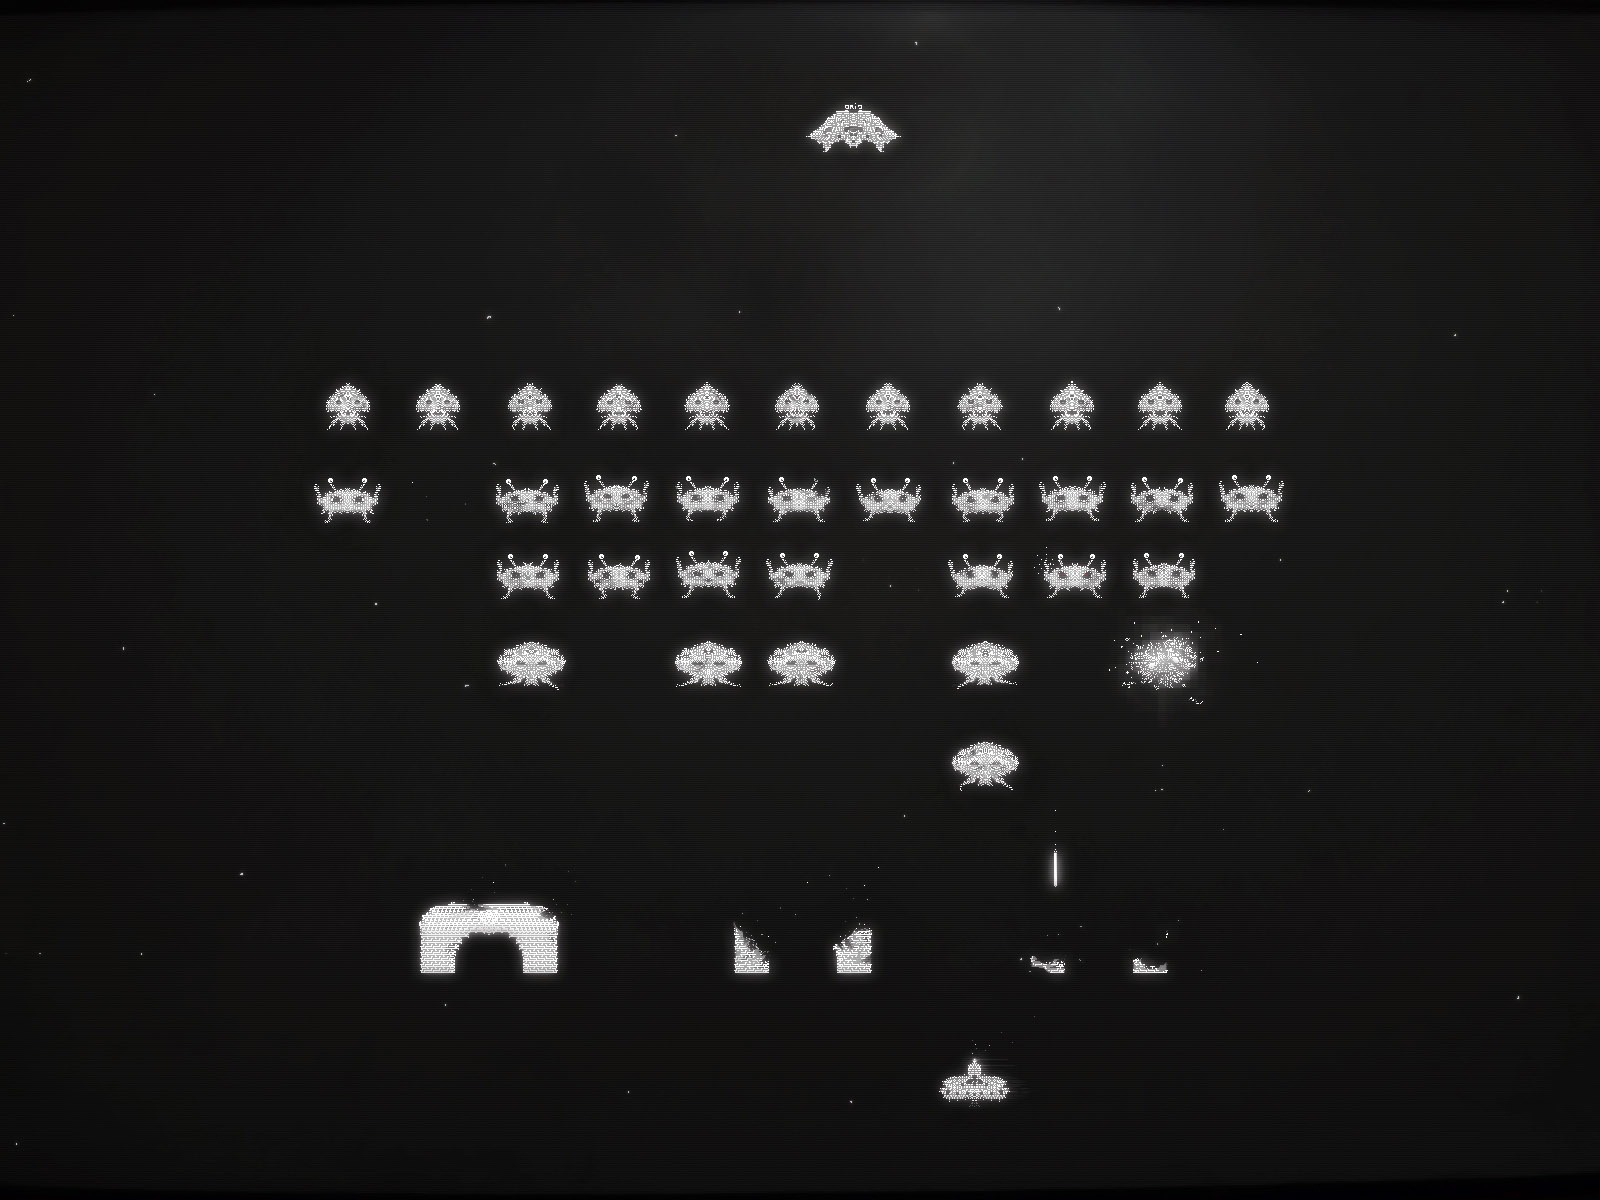 Space Invaders Wallpaper X Press Start To Play